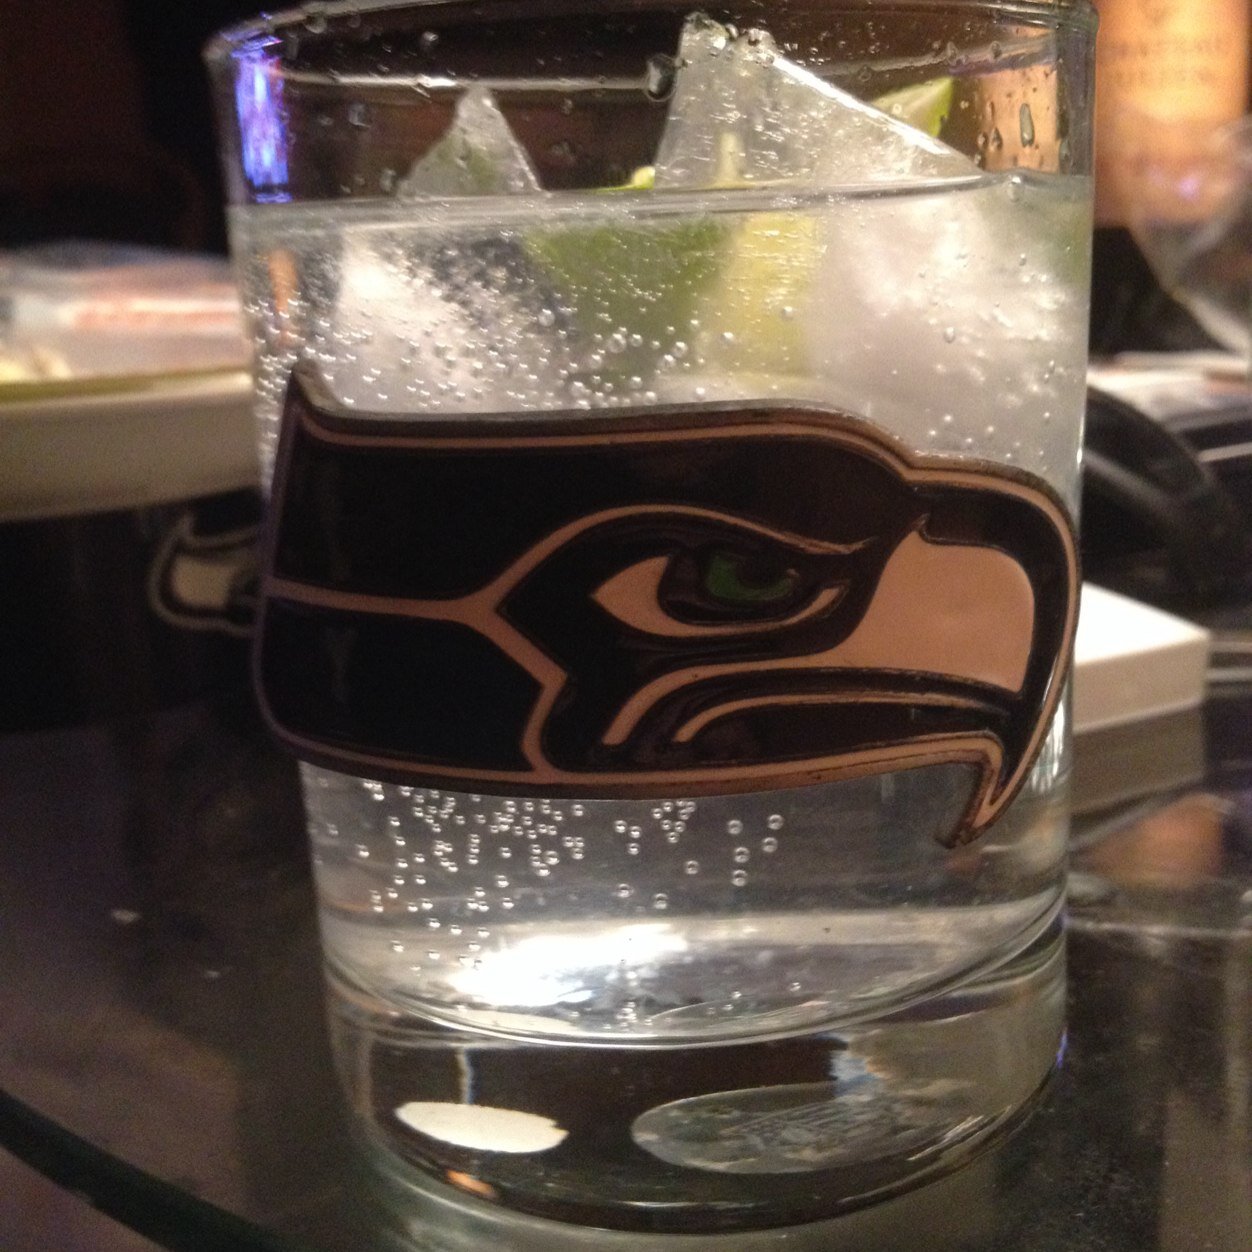 Head chef of the Fake Gourmets of Lynnwood. Lifelong Seahawks fan. The Mariners force me to drink. Bring back my Sonics.